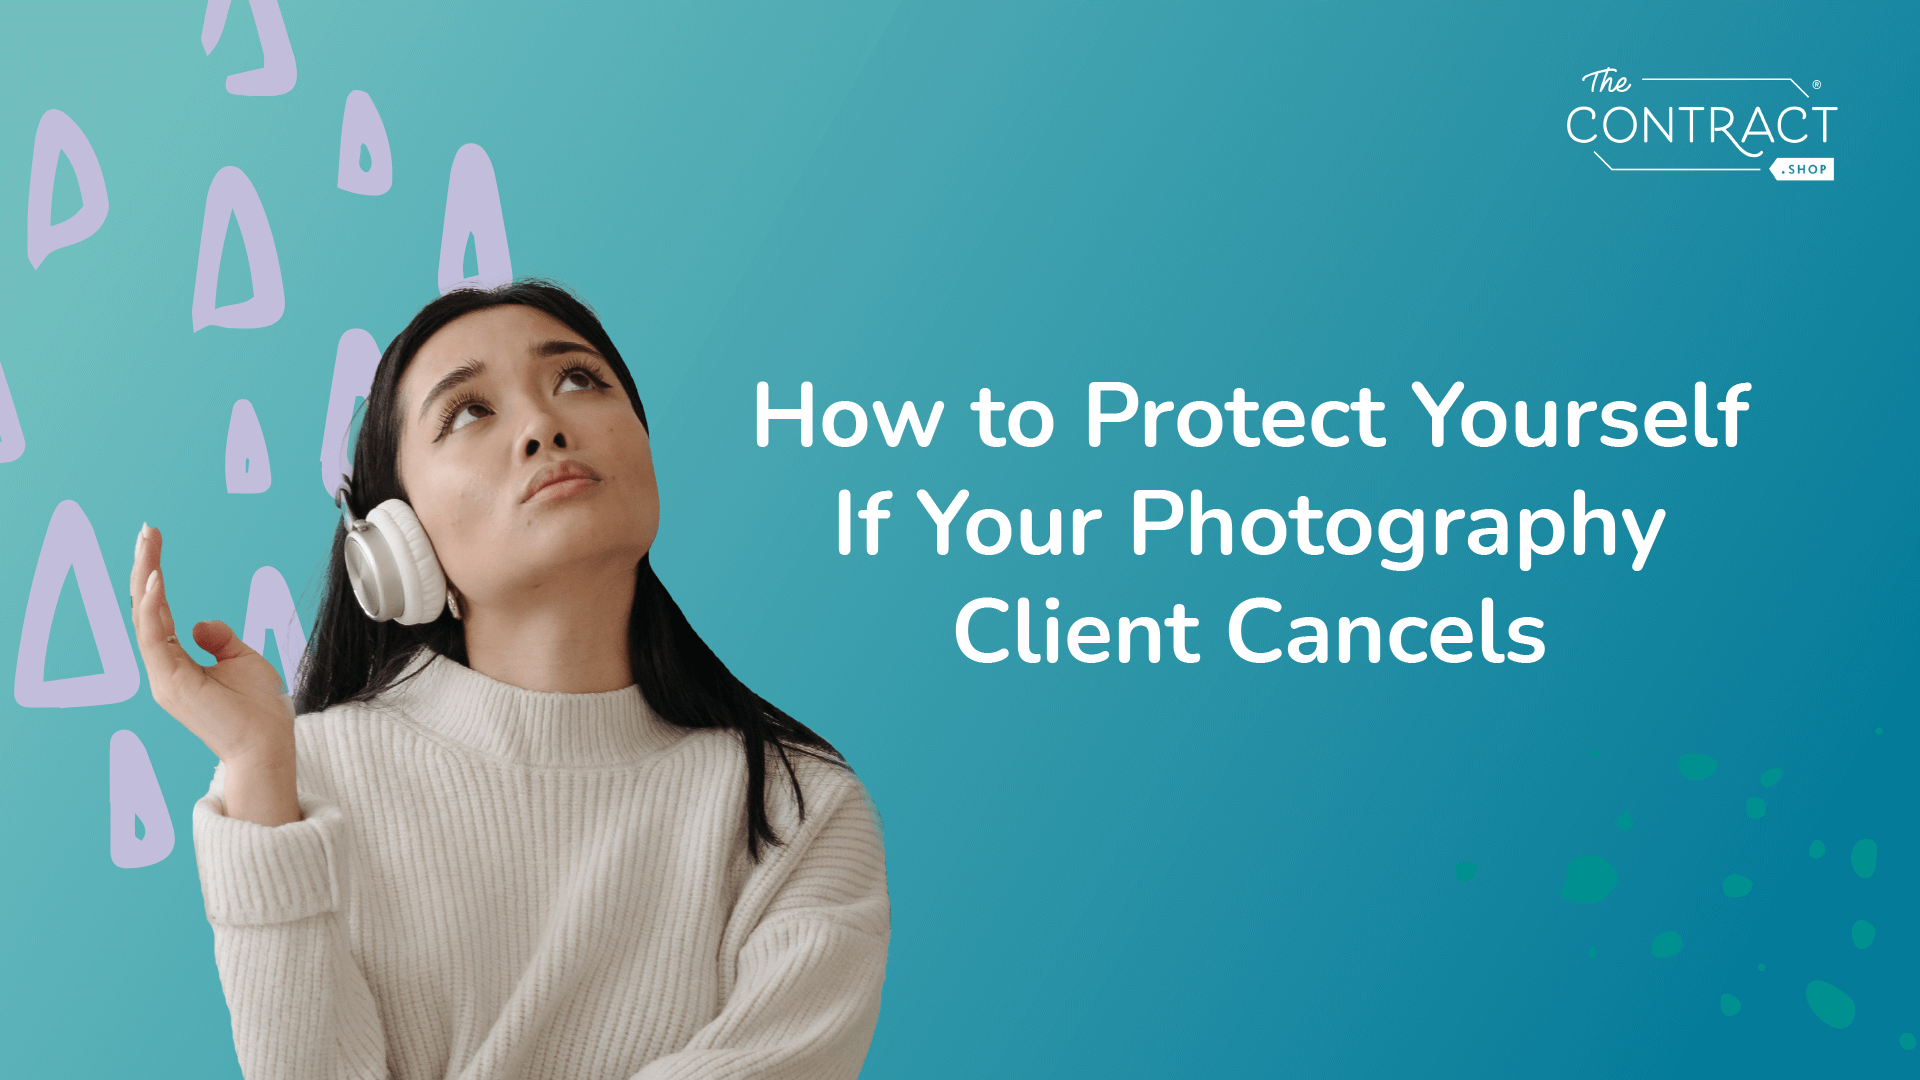 How to protect yourself if your photography client cancels